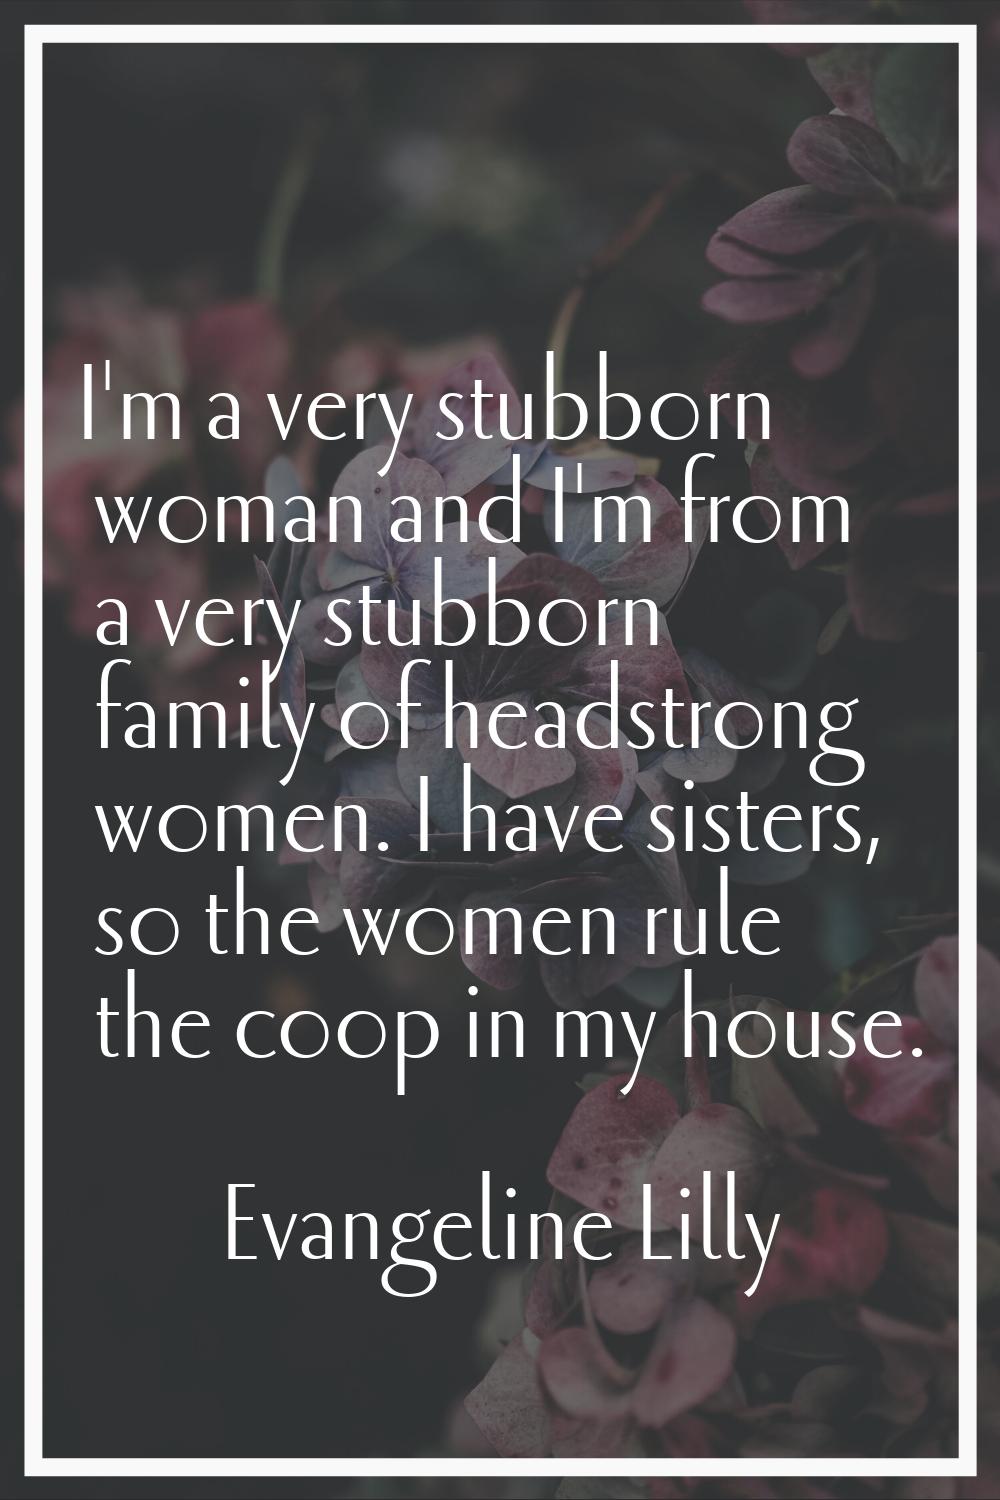 I'm a very stubborn woman and I'm from a very stubborn family of headstrong women. I have sisters, 